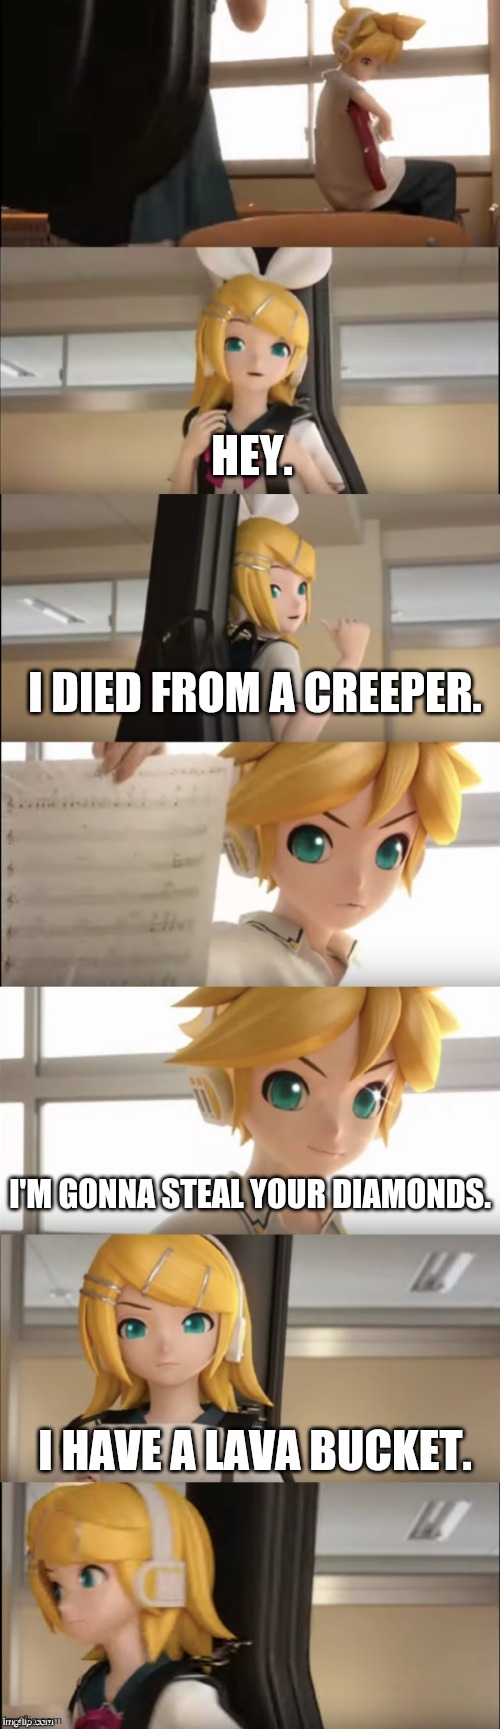 And this is why Len dies after every song. | HEY. I DIED FROM A CREEPER. I'M GONNA STEAL YOUR DIAMONDS. I HAVE A LAVA BUCKET. | image tagged in rin and len kagamine sibling conversation,minecraft creeper,diamonds,lava,vocaloid | made w/ Imgflip meme maker